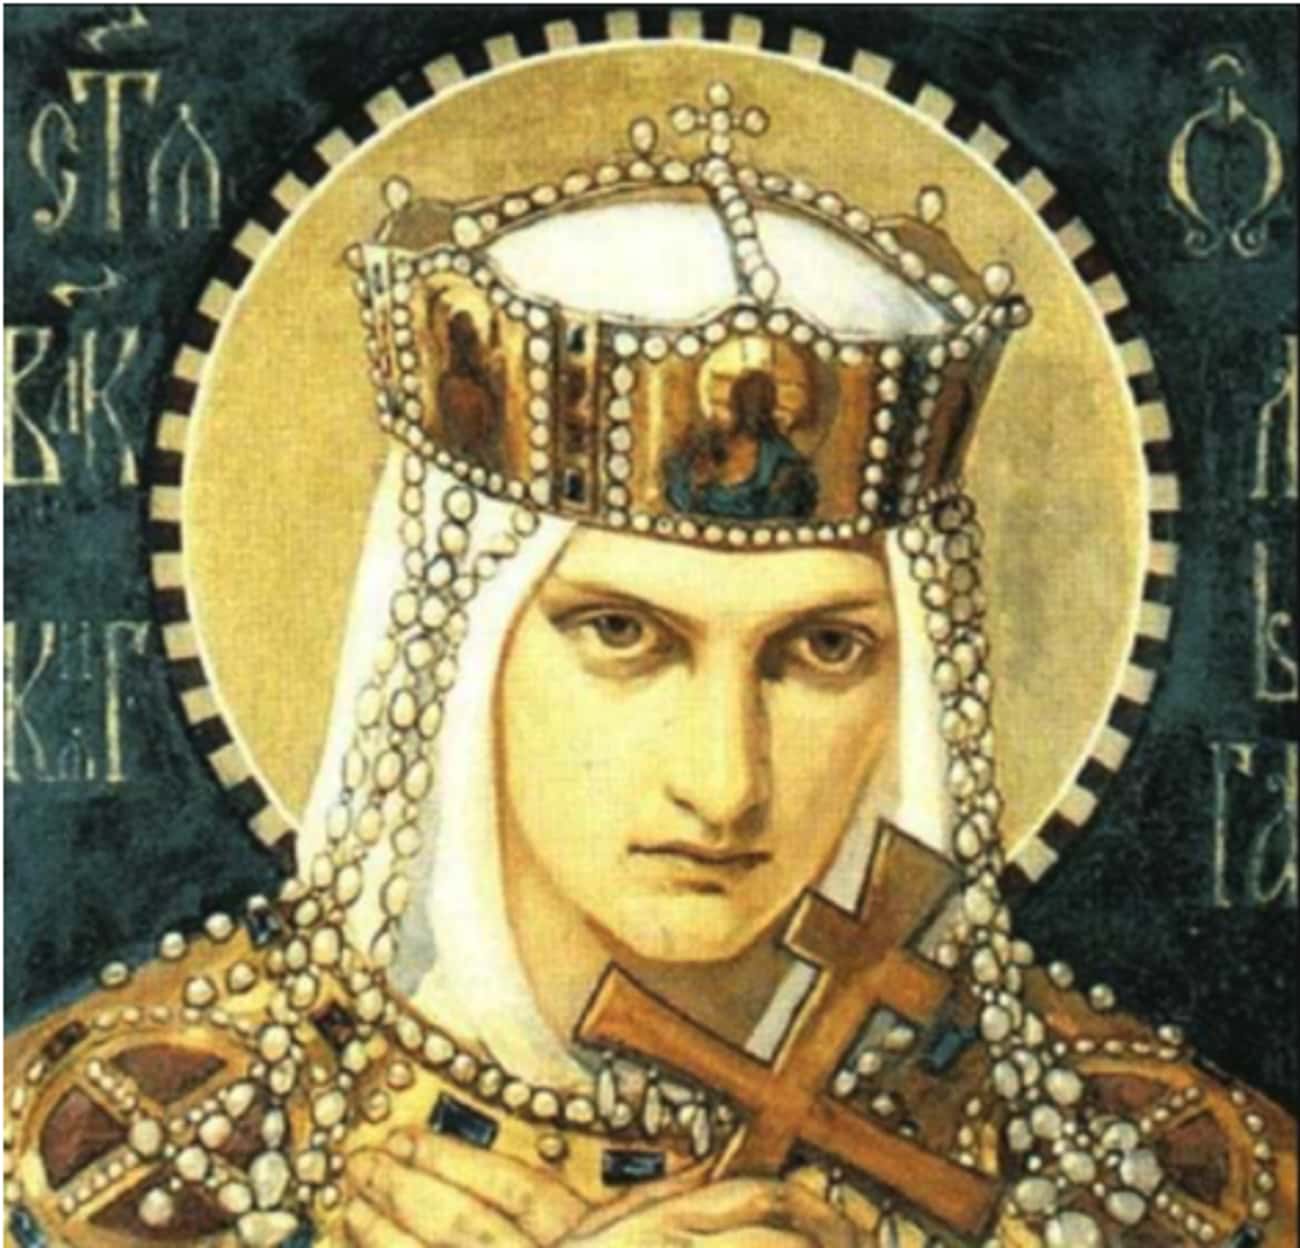 Saint Olga Of Kyiv Had Her Husband's Murderers Buried Alive, Scalded, And Their City Destroyed